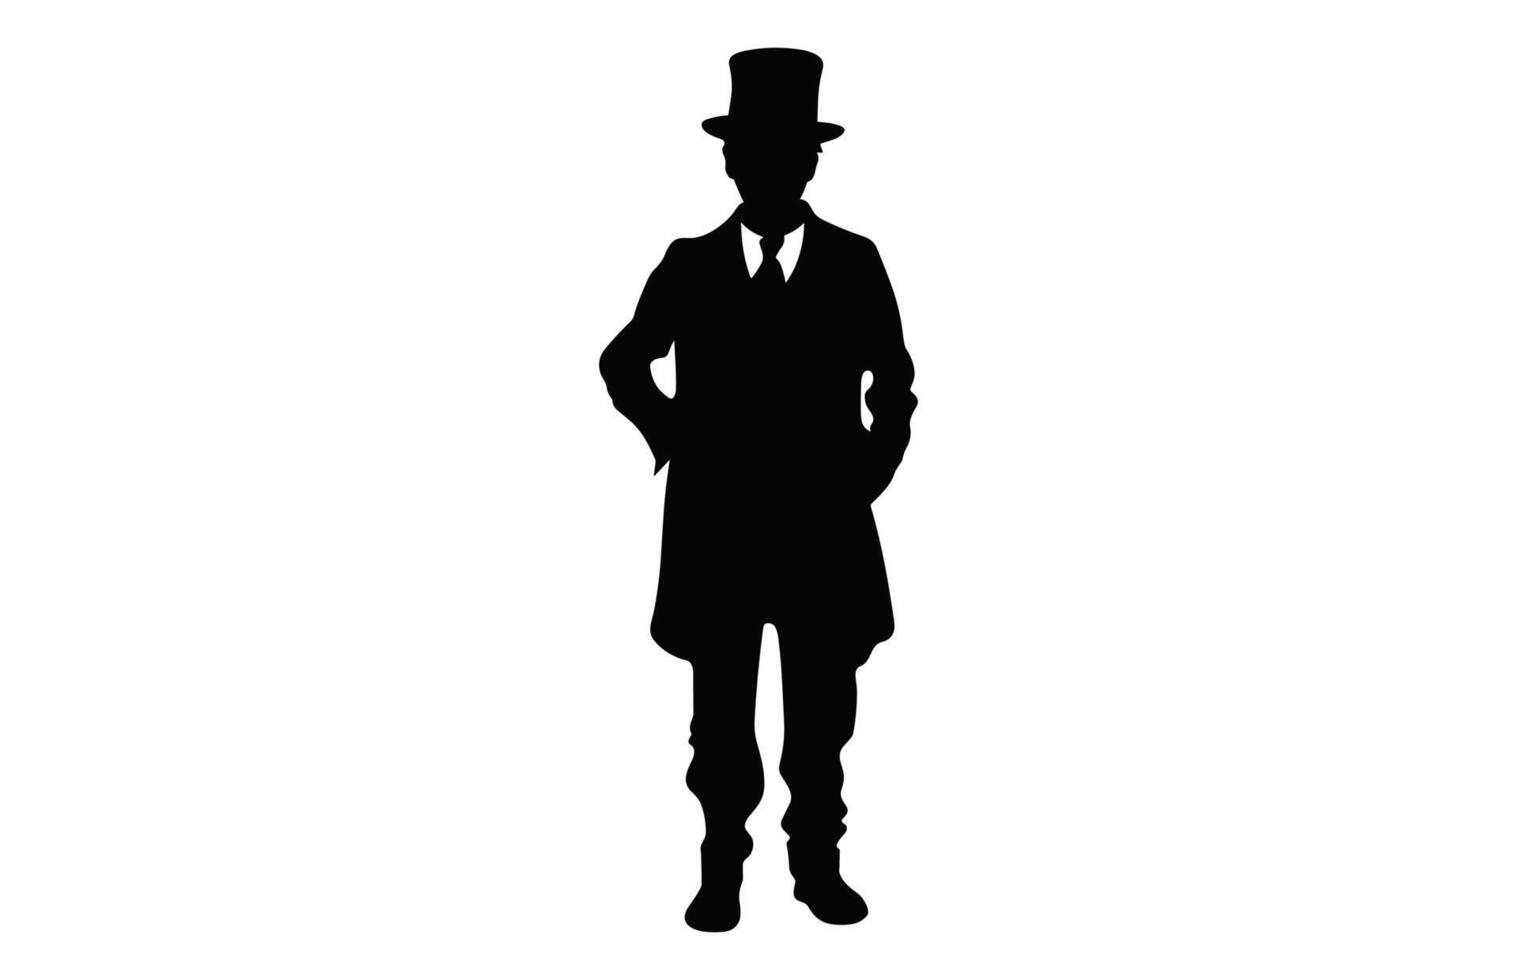 Clown Attraction Silhouette black vector isolated on a white background